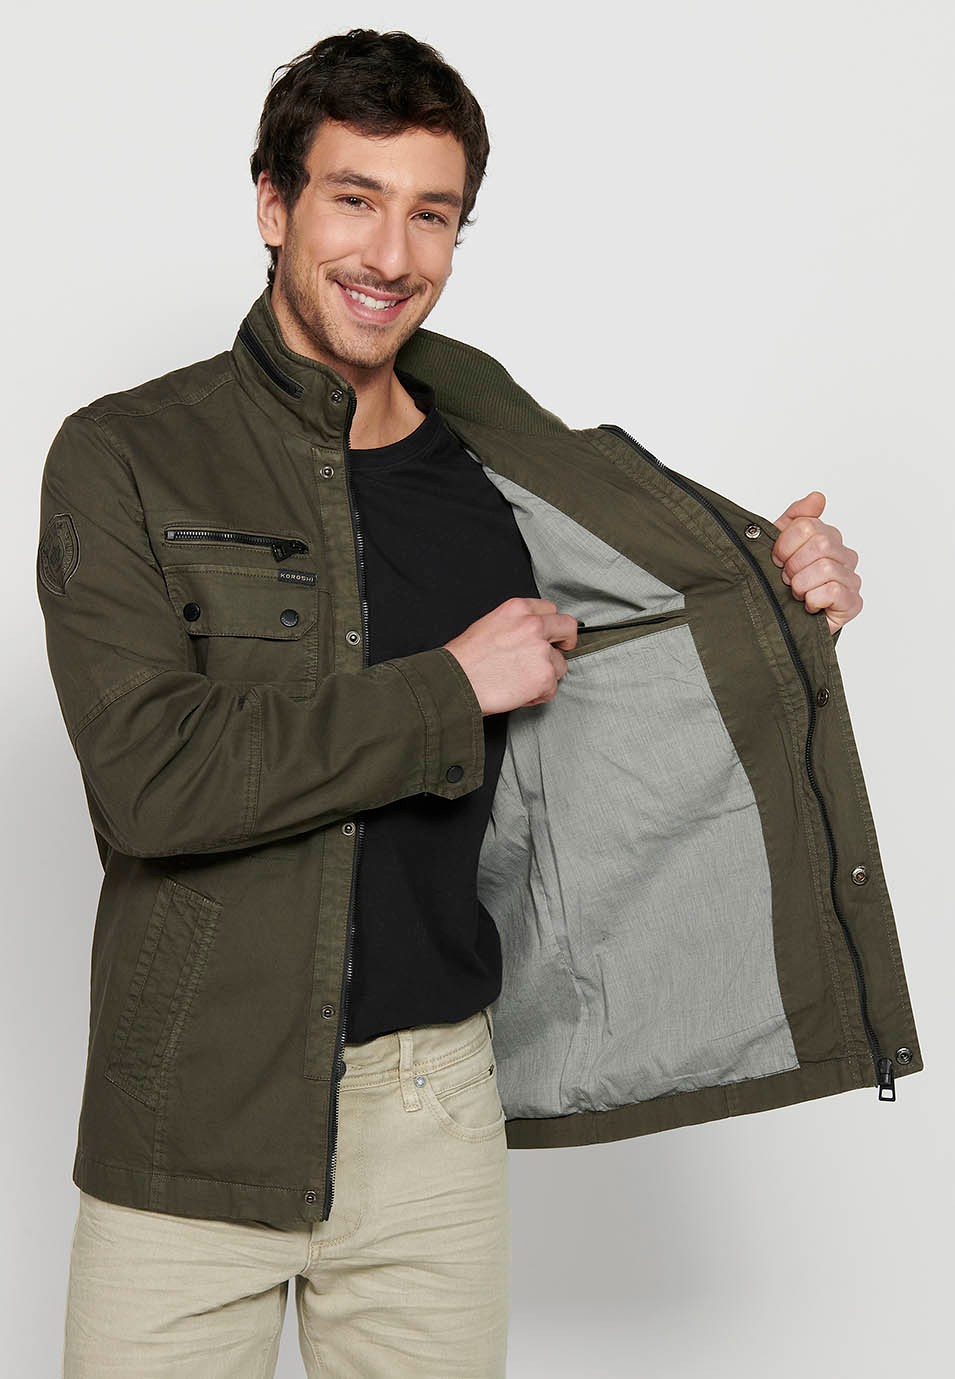 Long Jacket with Zipper Front Closure and Lapel with Stand Collar and Flap Pockets in Olive Color for Men 9